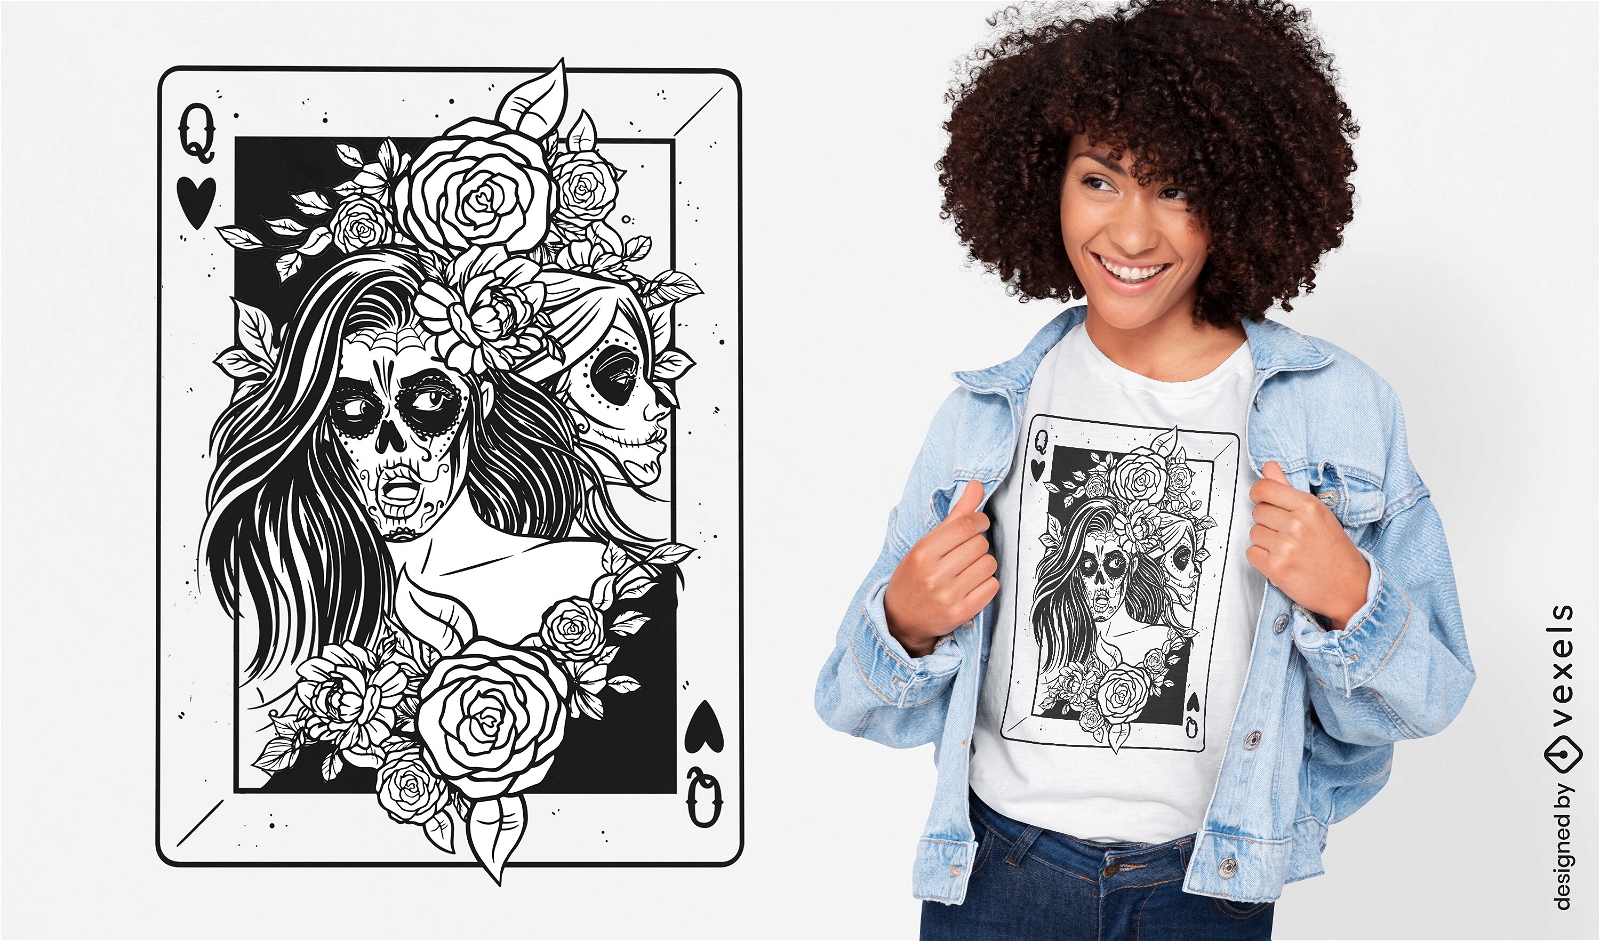 Queen of hearts Mexican card t-shirt design